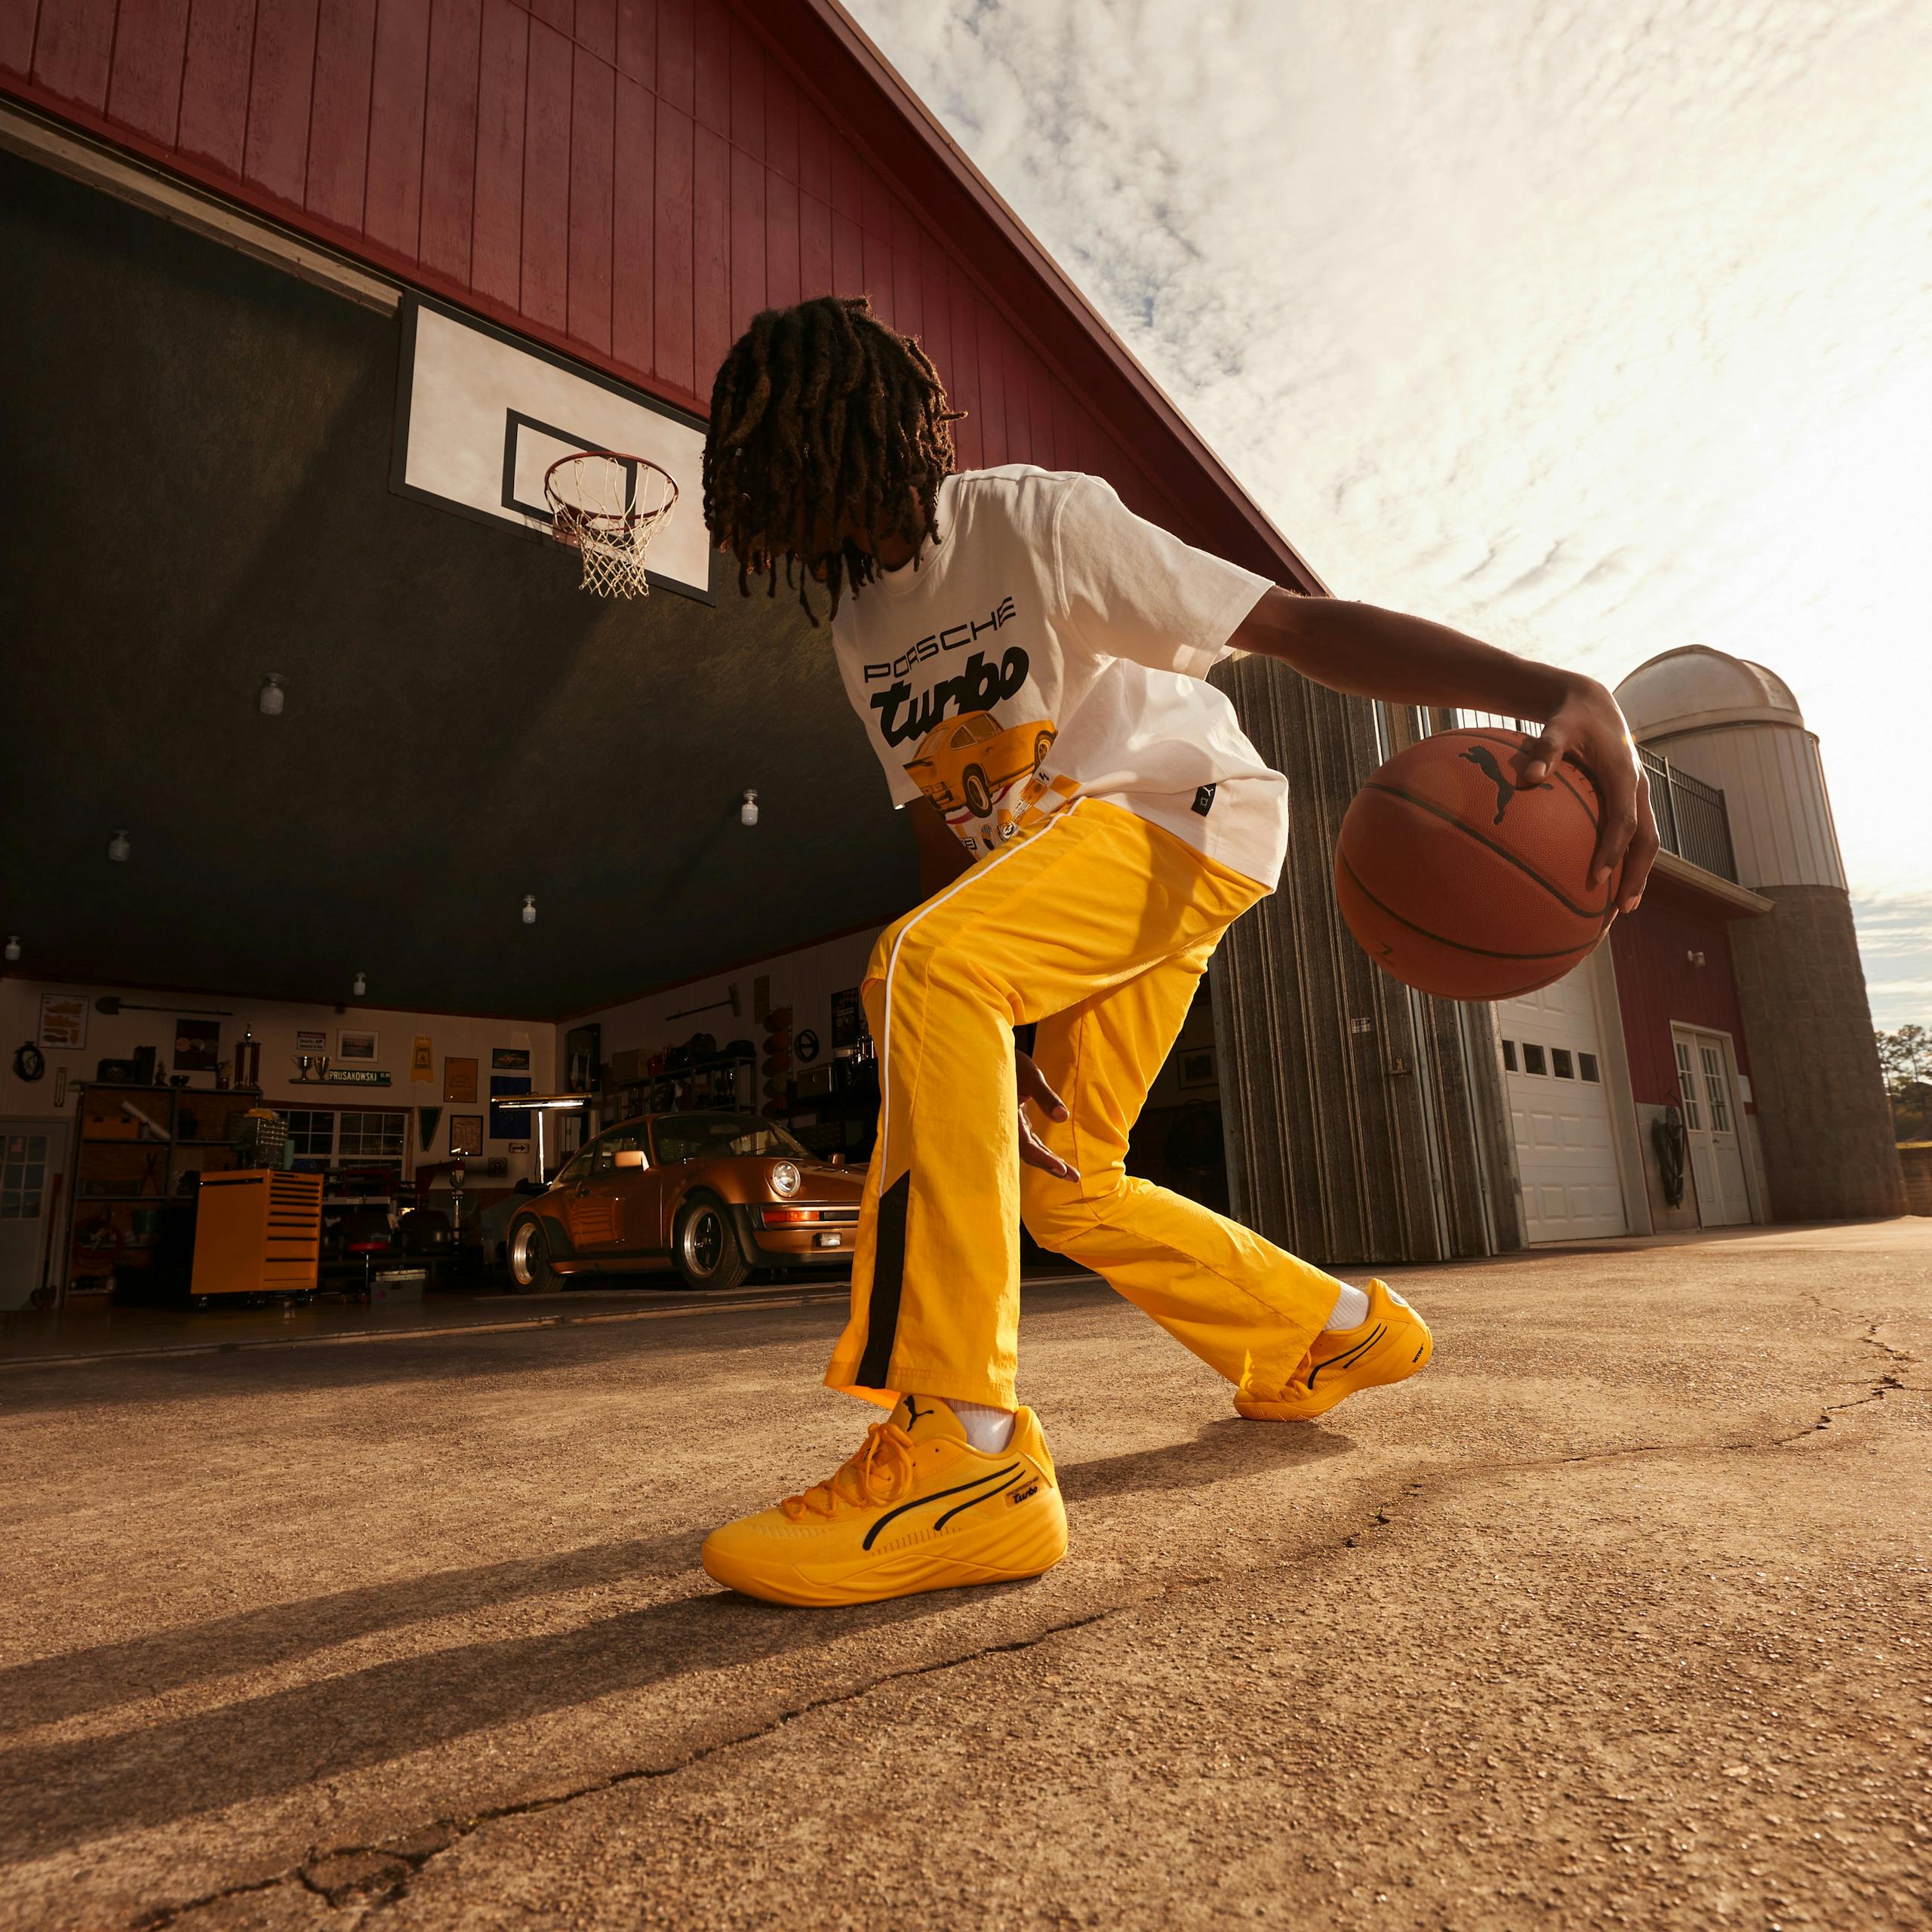 The image depicts a man playing basketball outdoors. He is wearing yellow Porsche x Puma clothing and appears to be on a basketball court. The image also includes a Porsche Turbo car